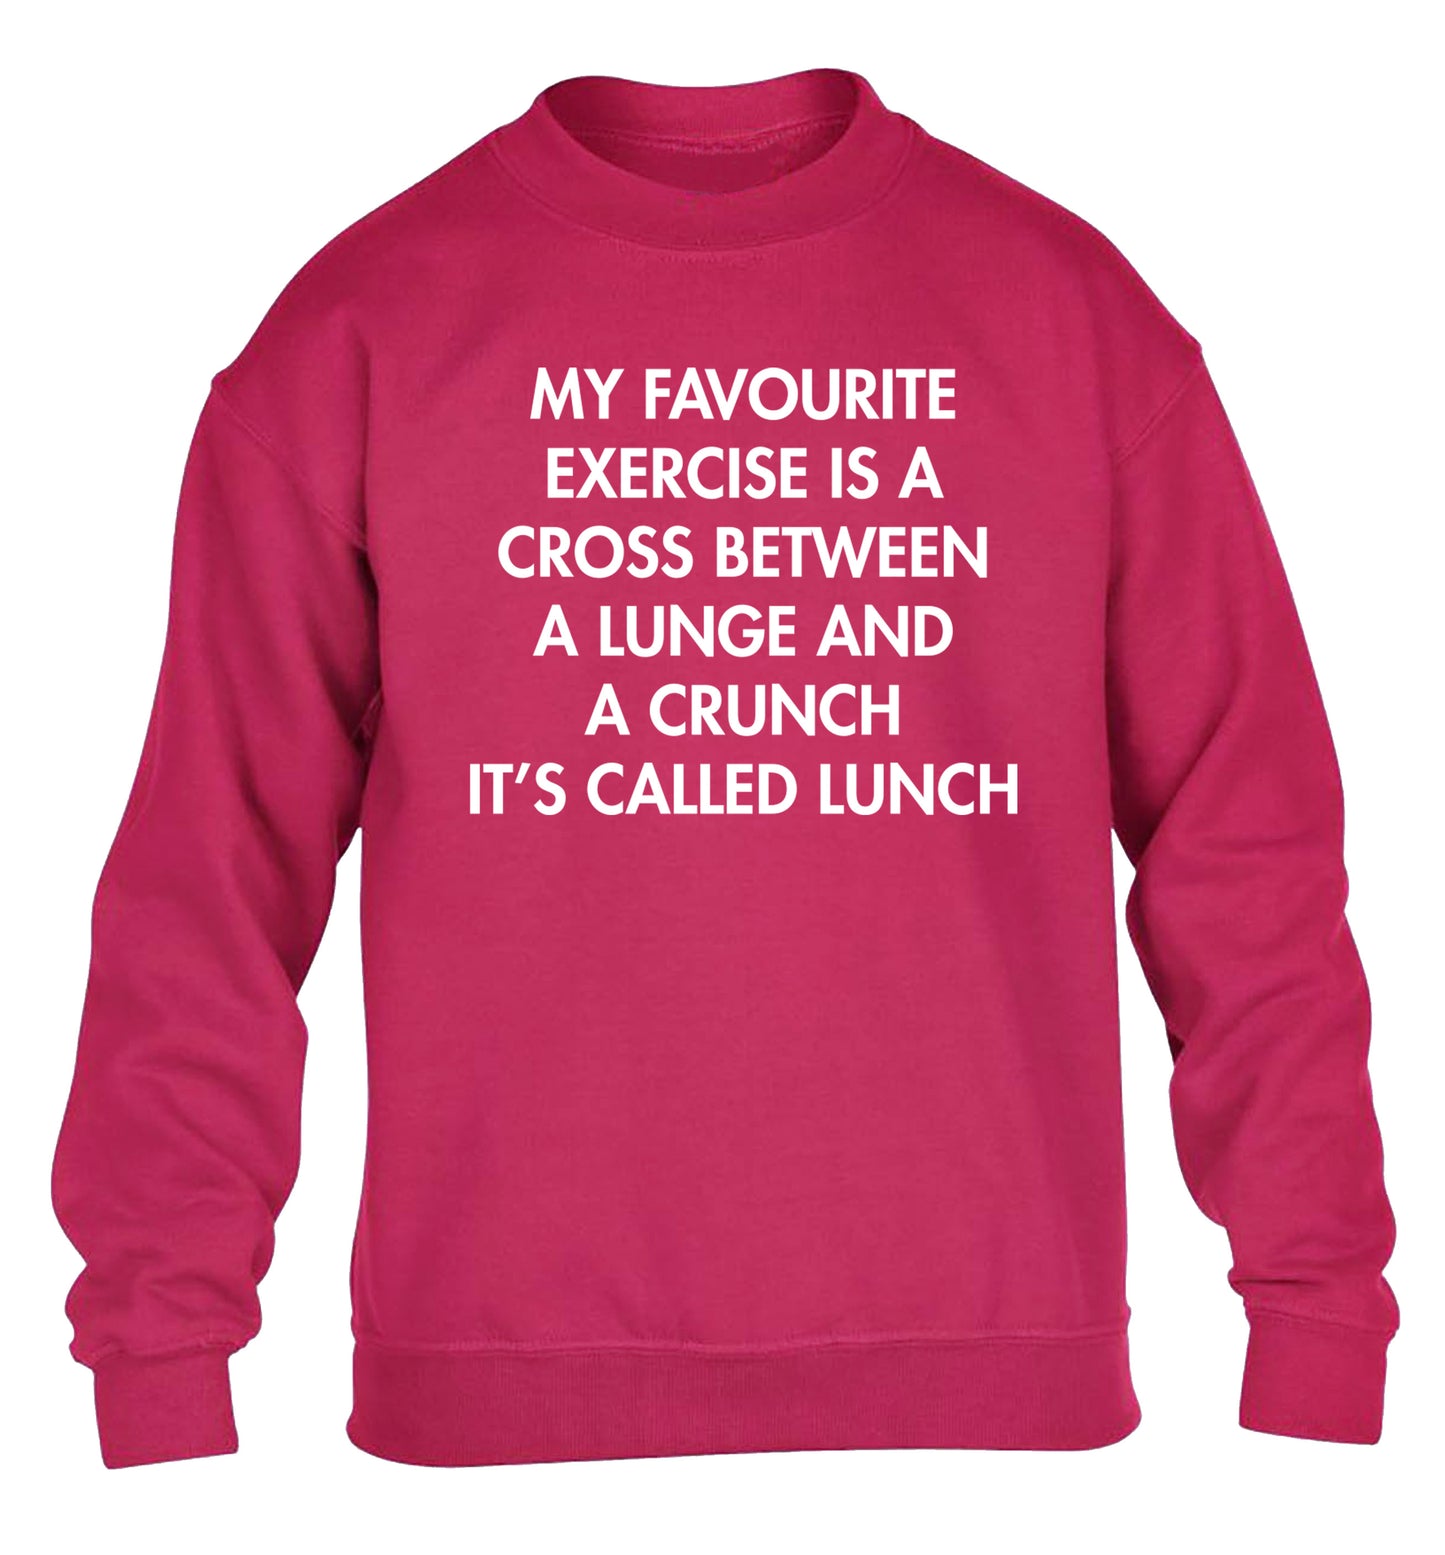 My favourite exercise is a cross between a lung and a crunch it's called lunch children's pink sweater 12-14 Years